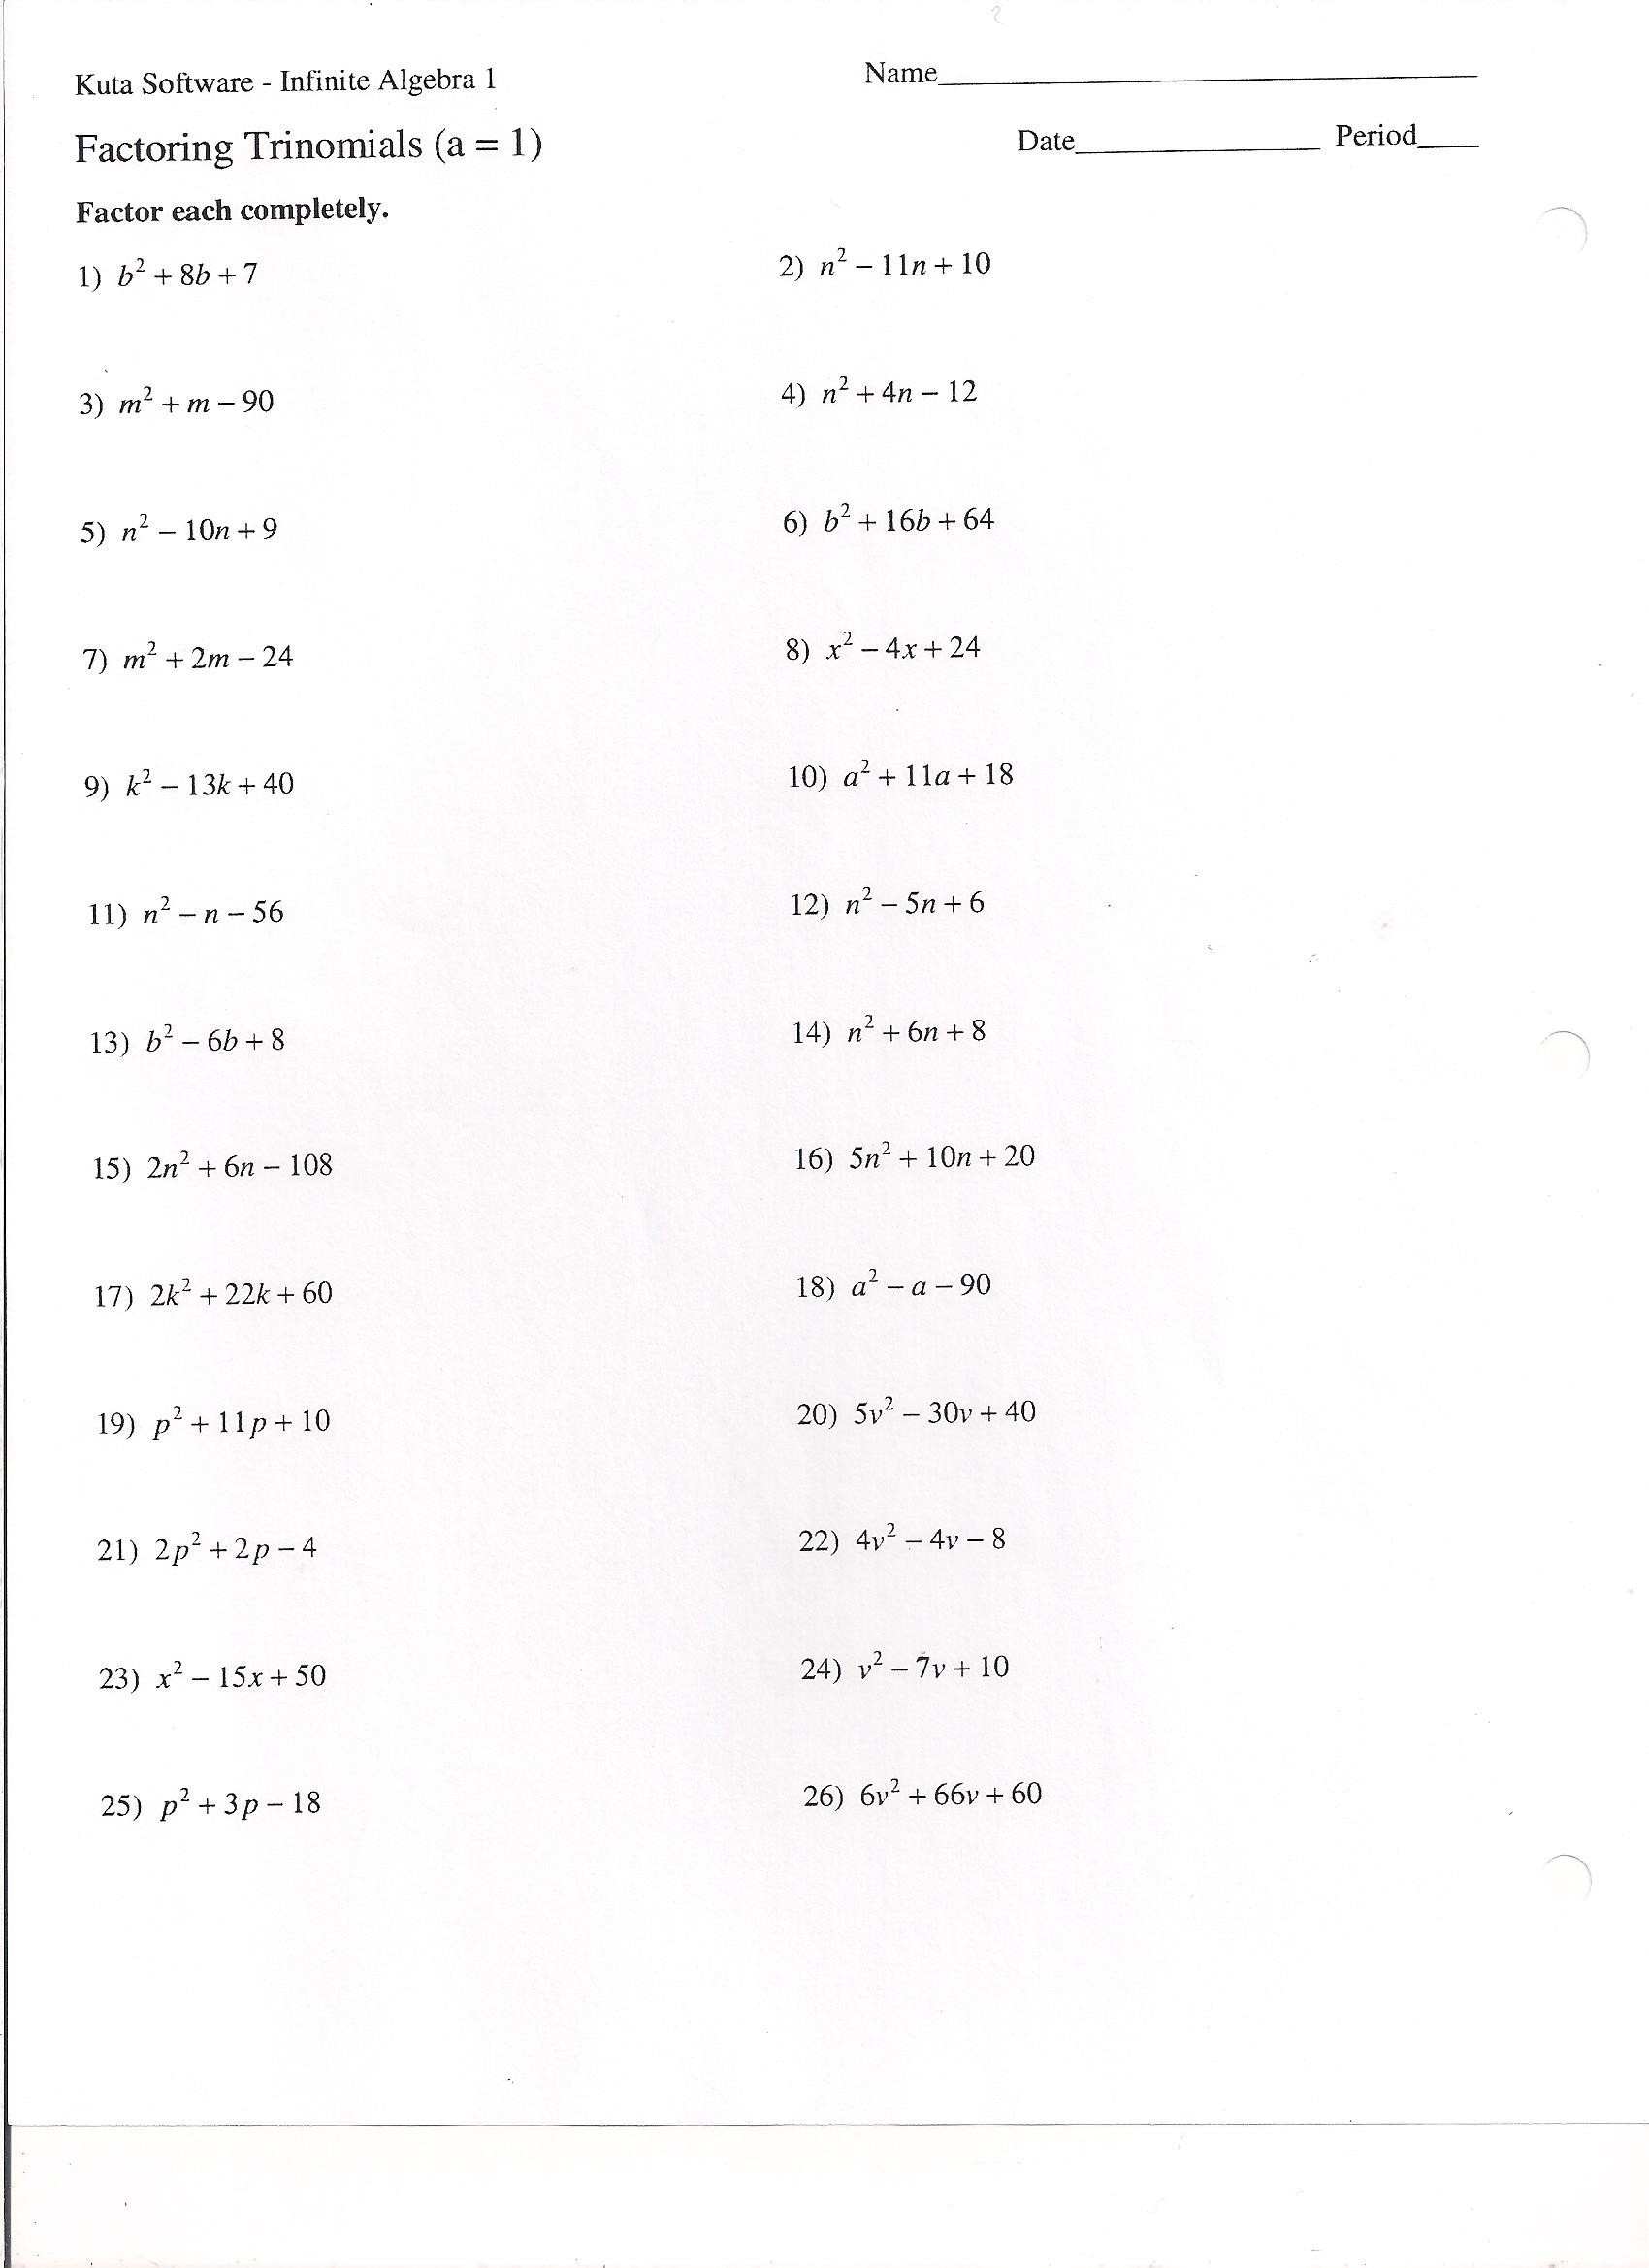 Factoring Trinomials Worksheet Answer Key Easy Factoring Trinomials Worksheets